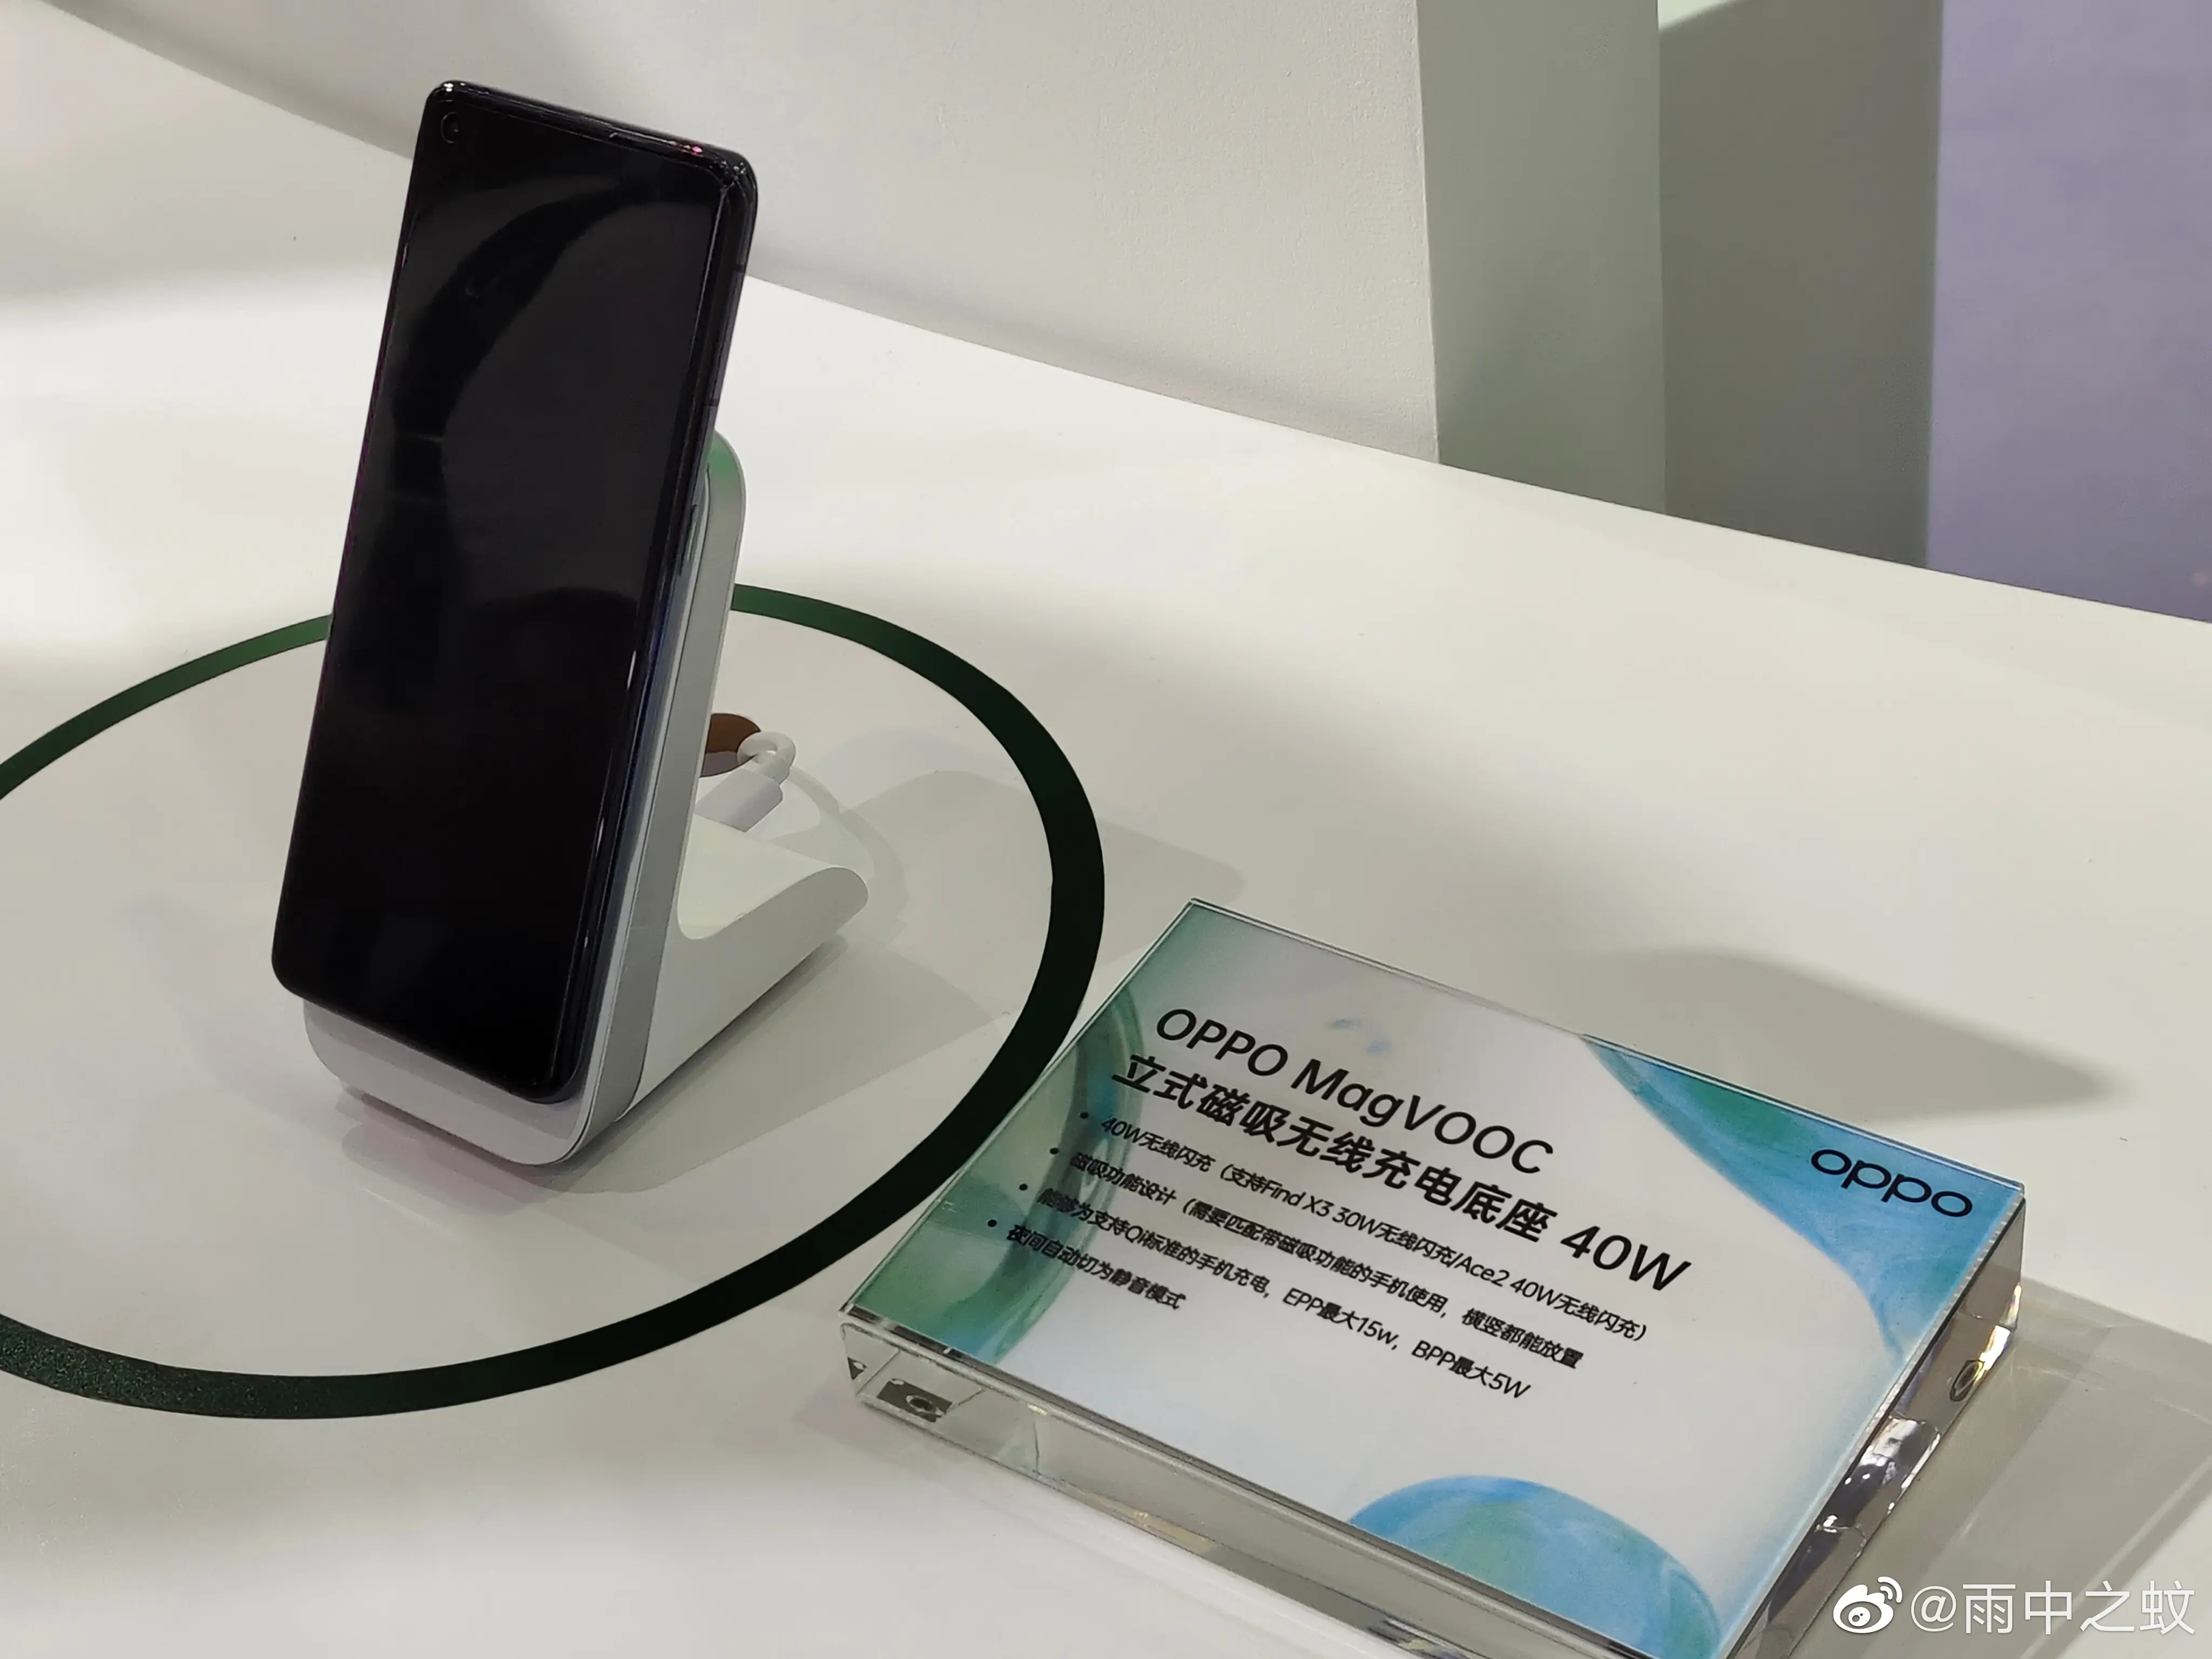 OPPO also presents its magnetic charging technology